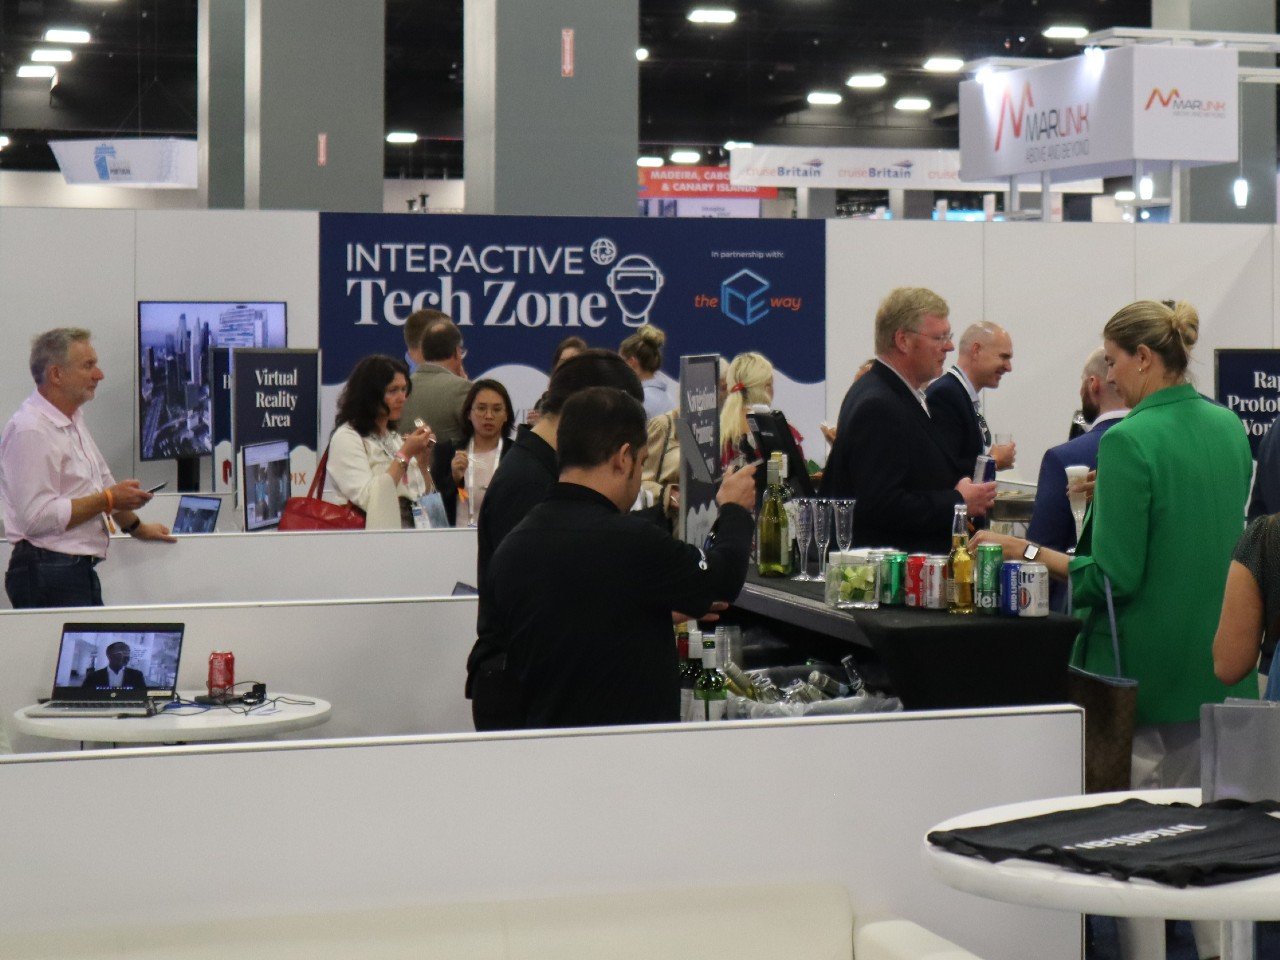 The Interactive Tech Zone, in partnership with theICEway